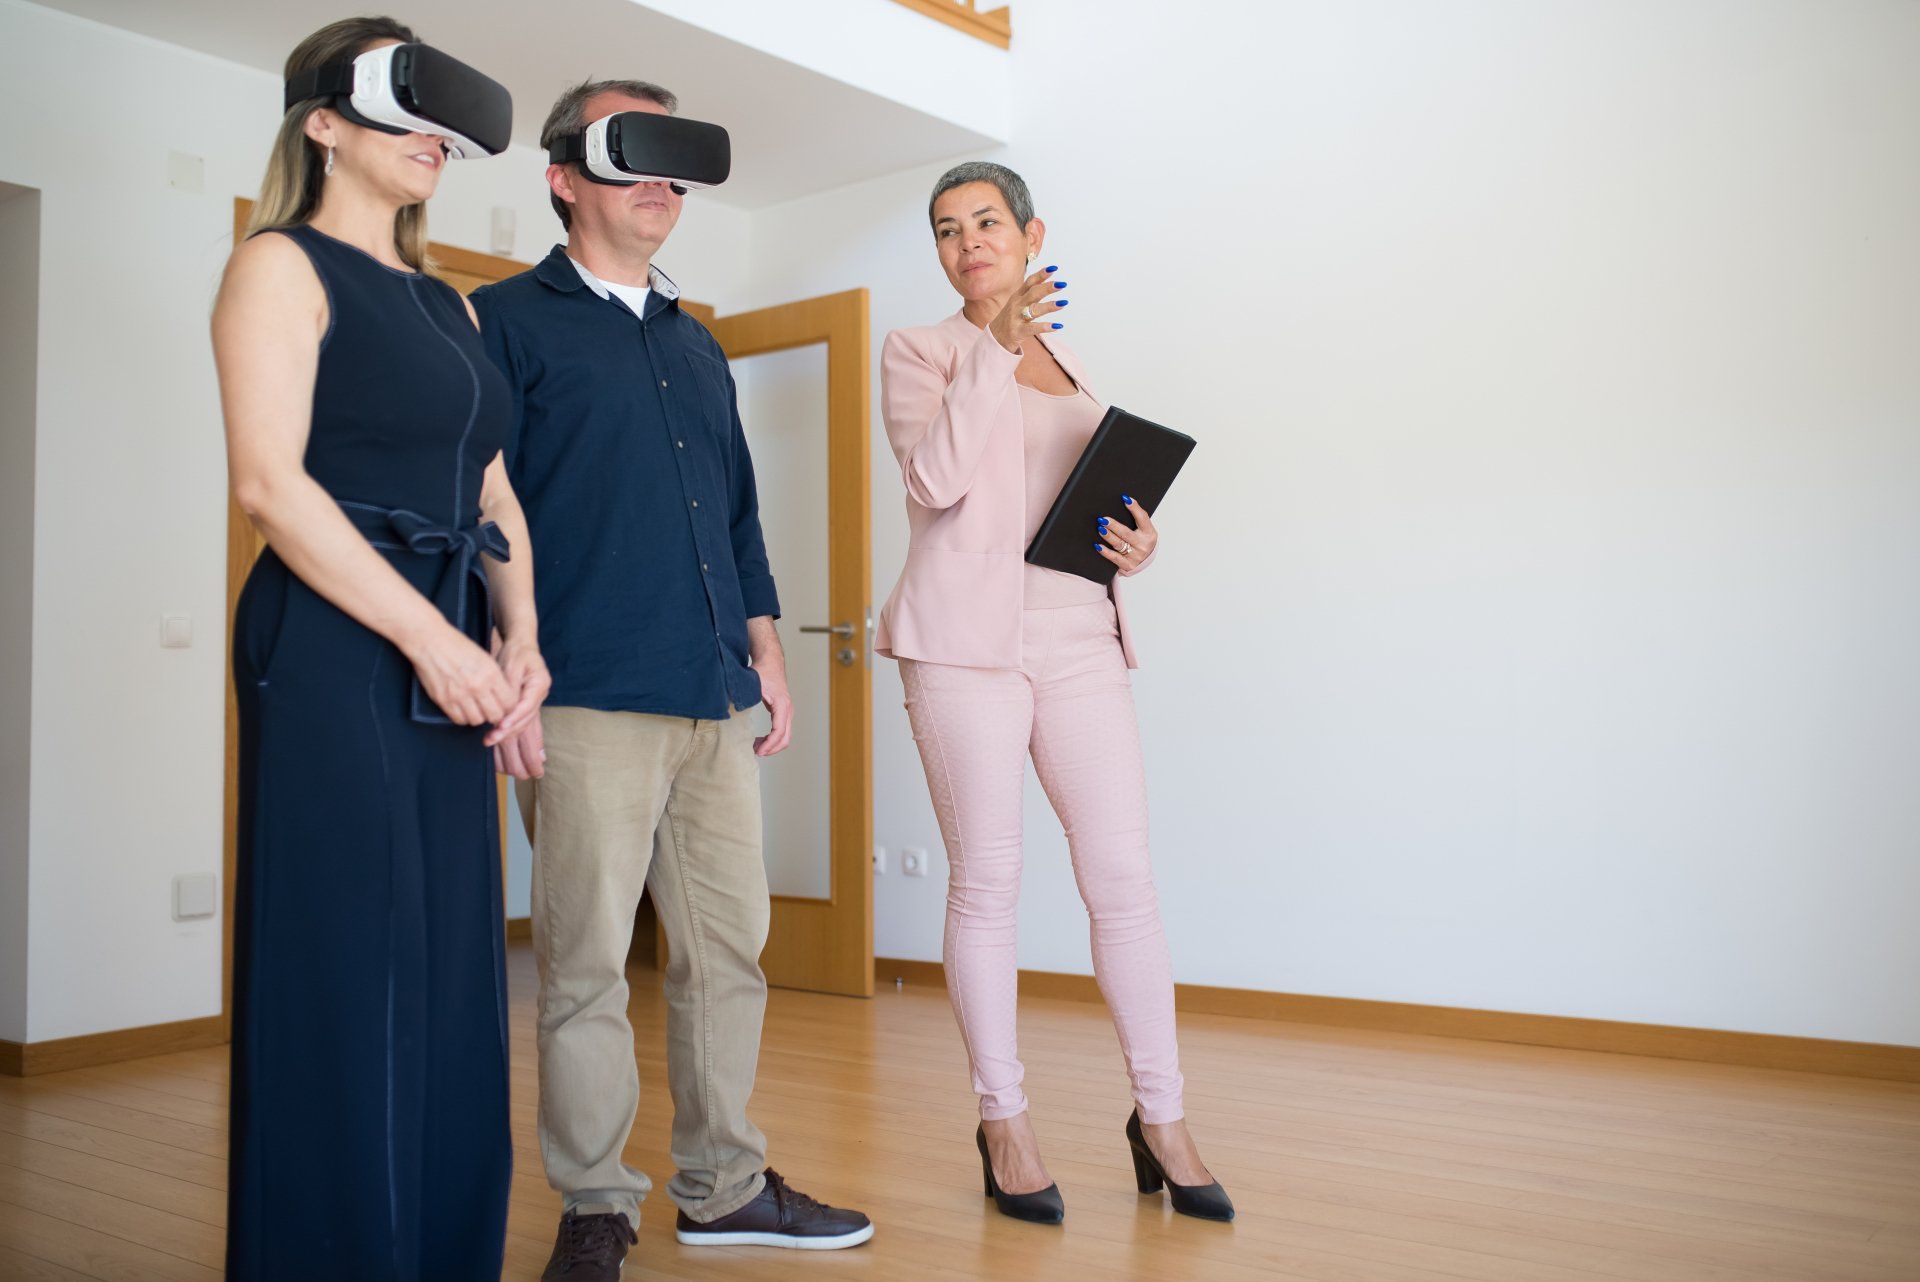 Saavy Real Estate Agent uses Virtual Technology goggles to present a space with augmented reality.